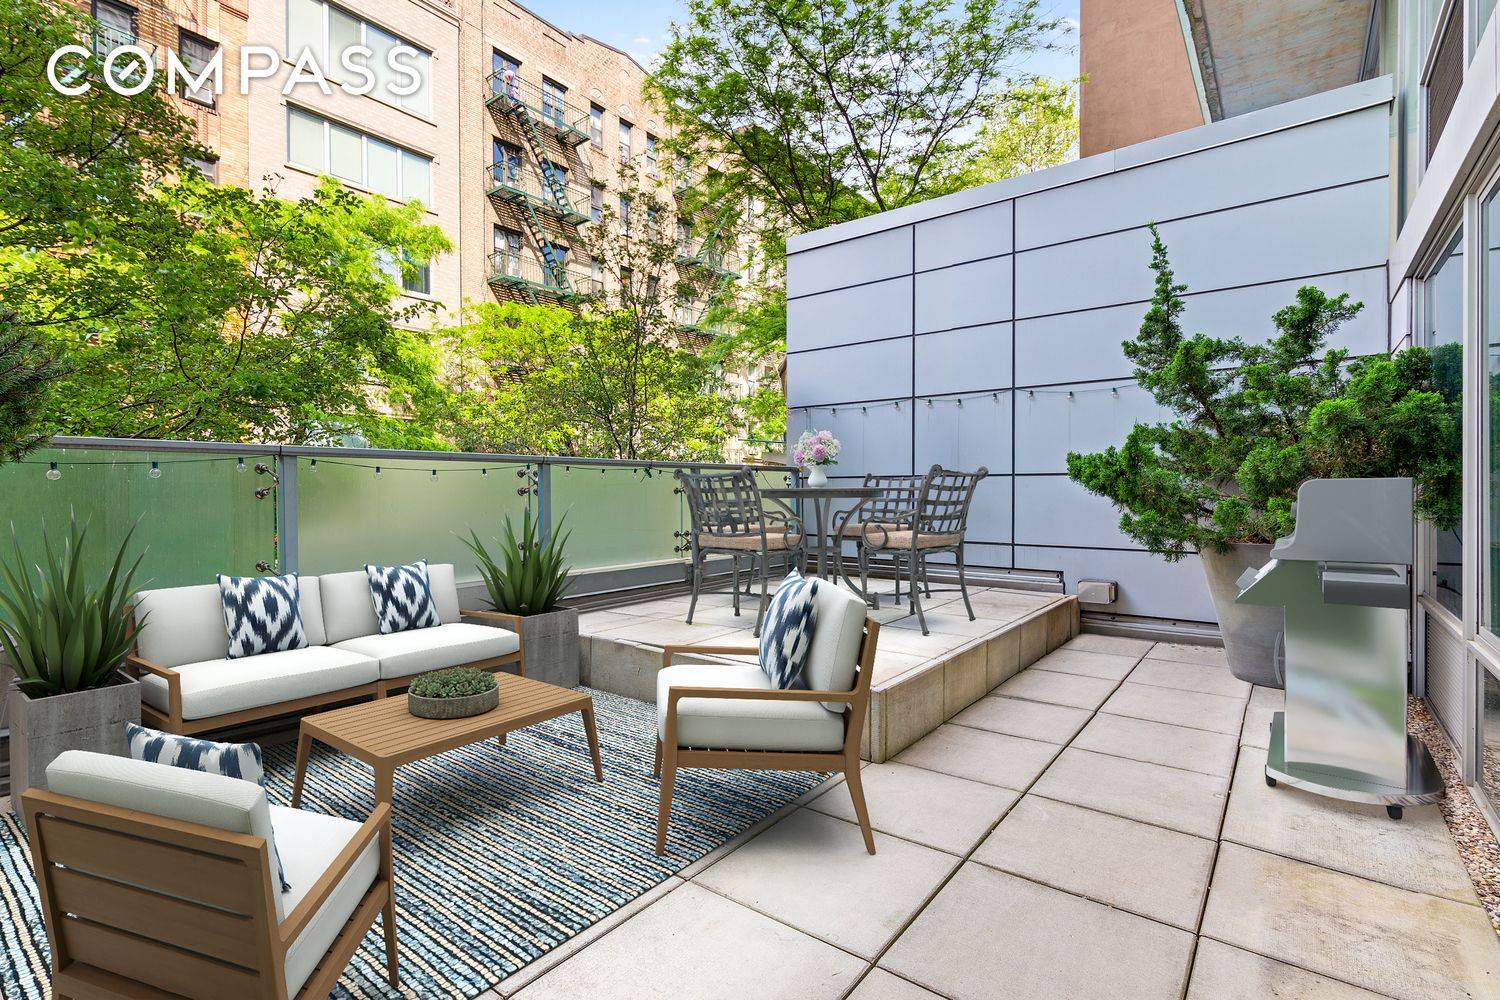 PRIVATE TERRACE 14 10 Residence 2G is a modern one bedroom apartment in the heart of Hell s Kitchen.